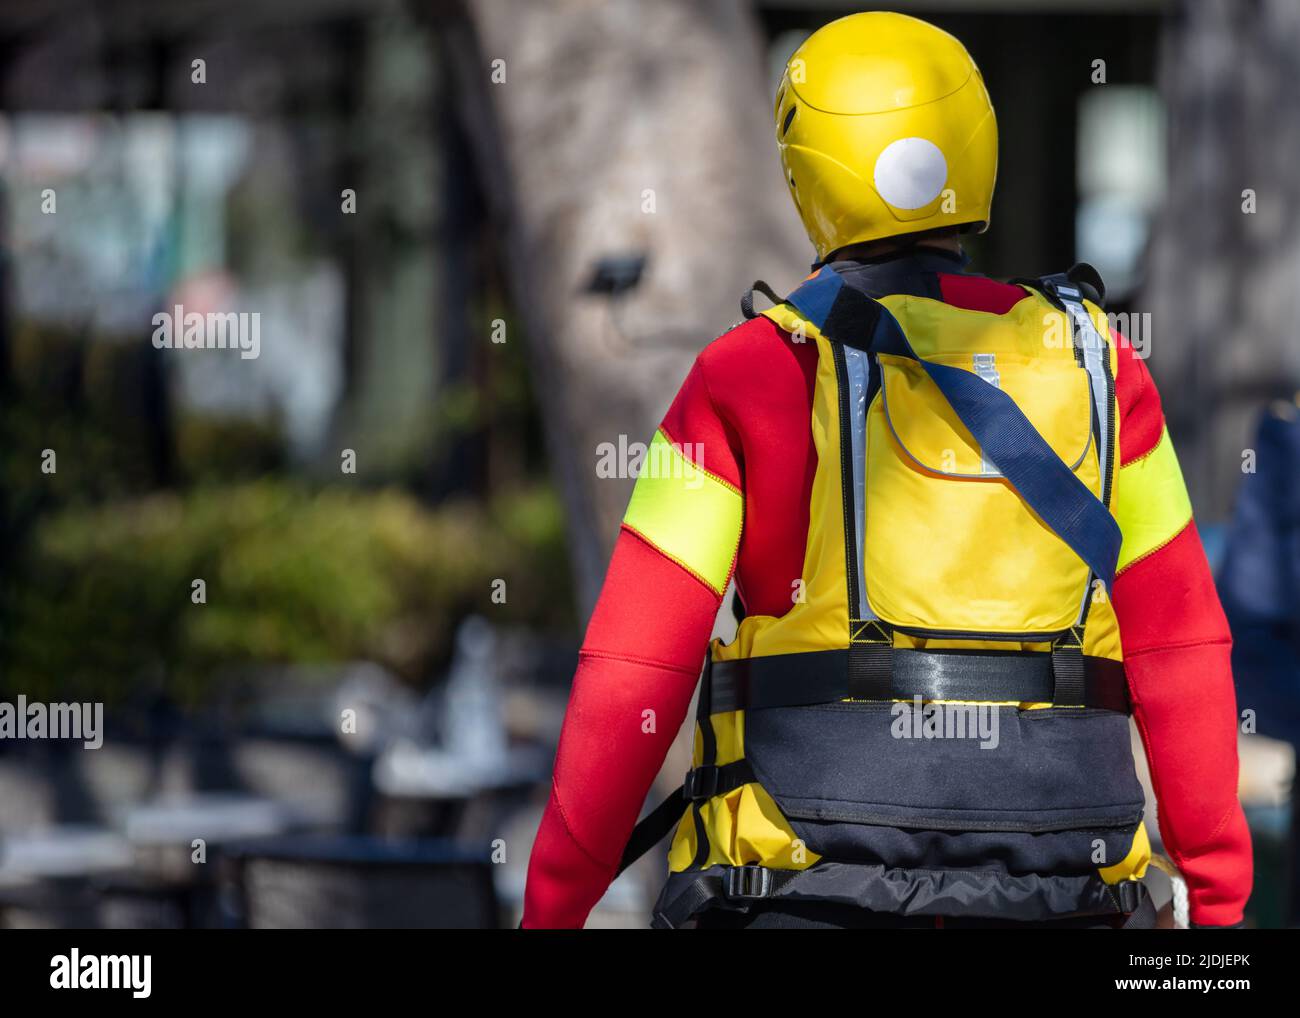 Volunteer of Nonprofit Organization with full equipment, rear view. First Aid, Emergency Medic Assistance. Stock Photo